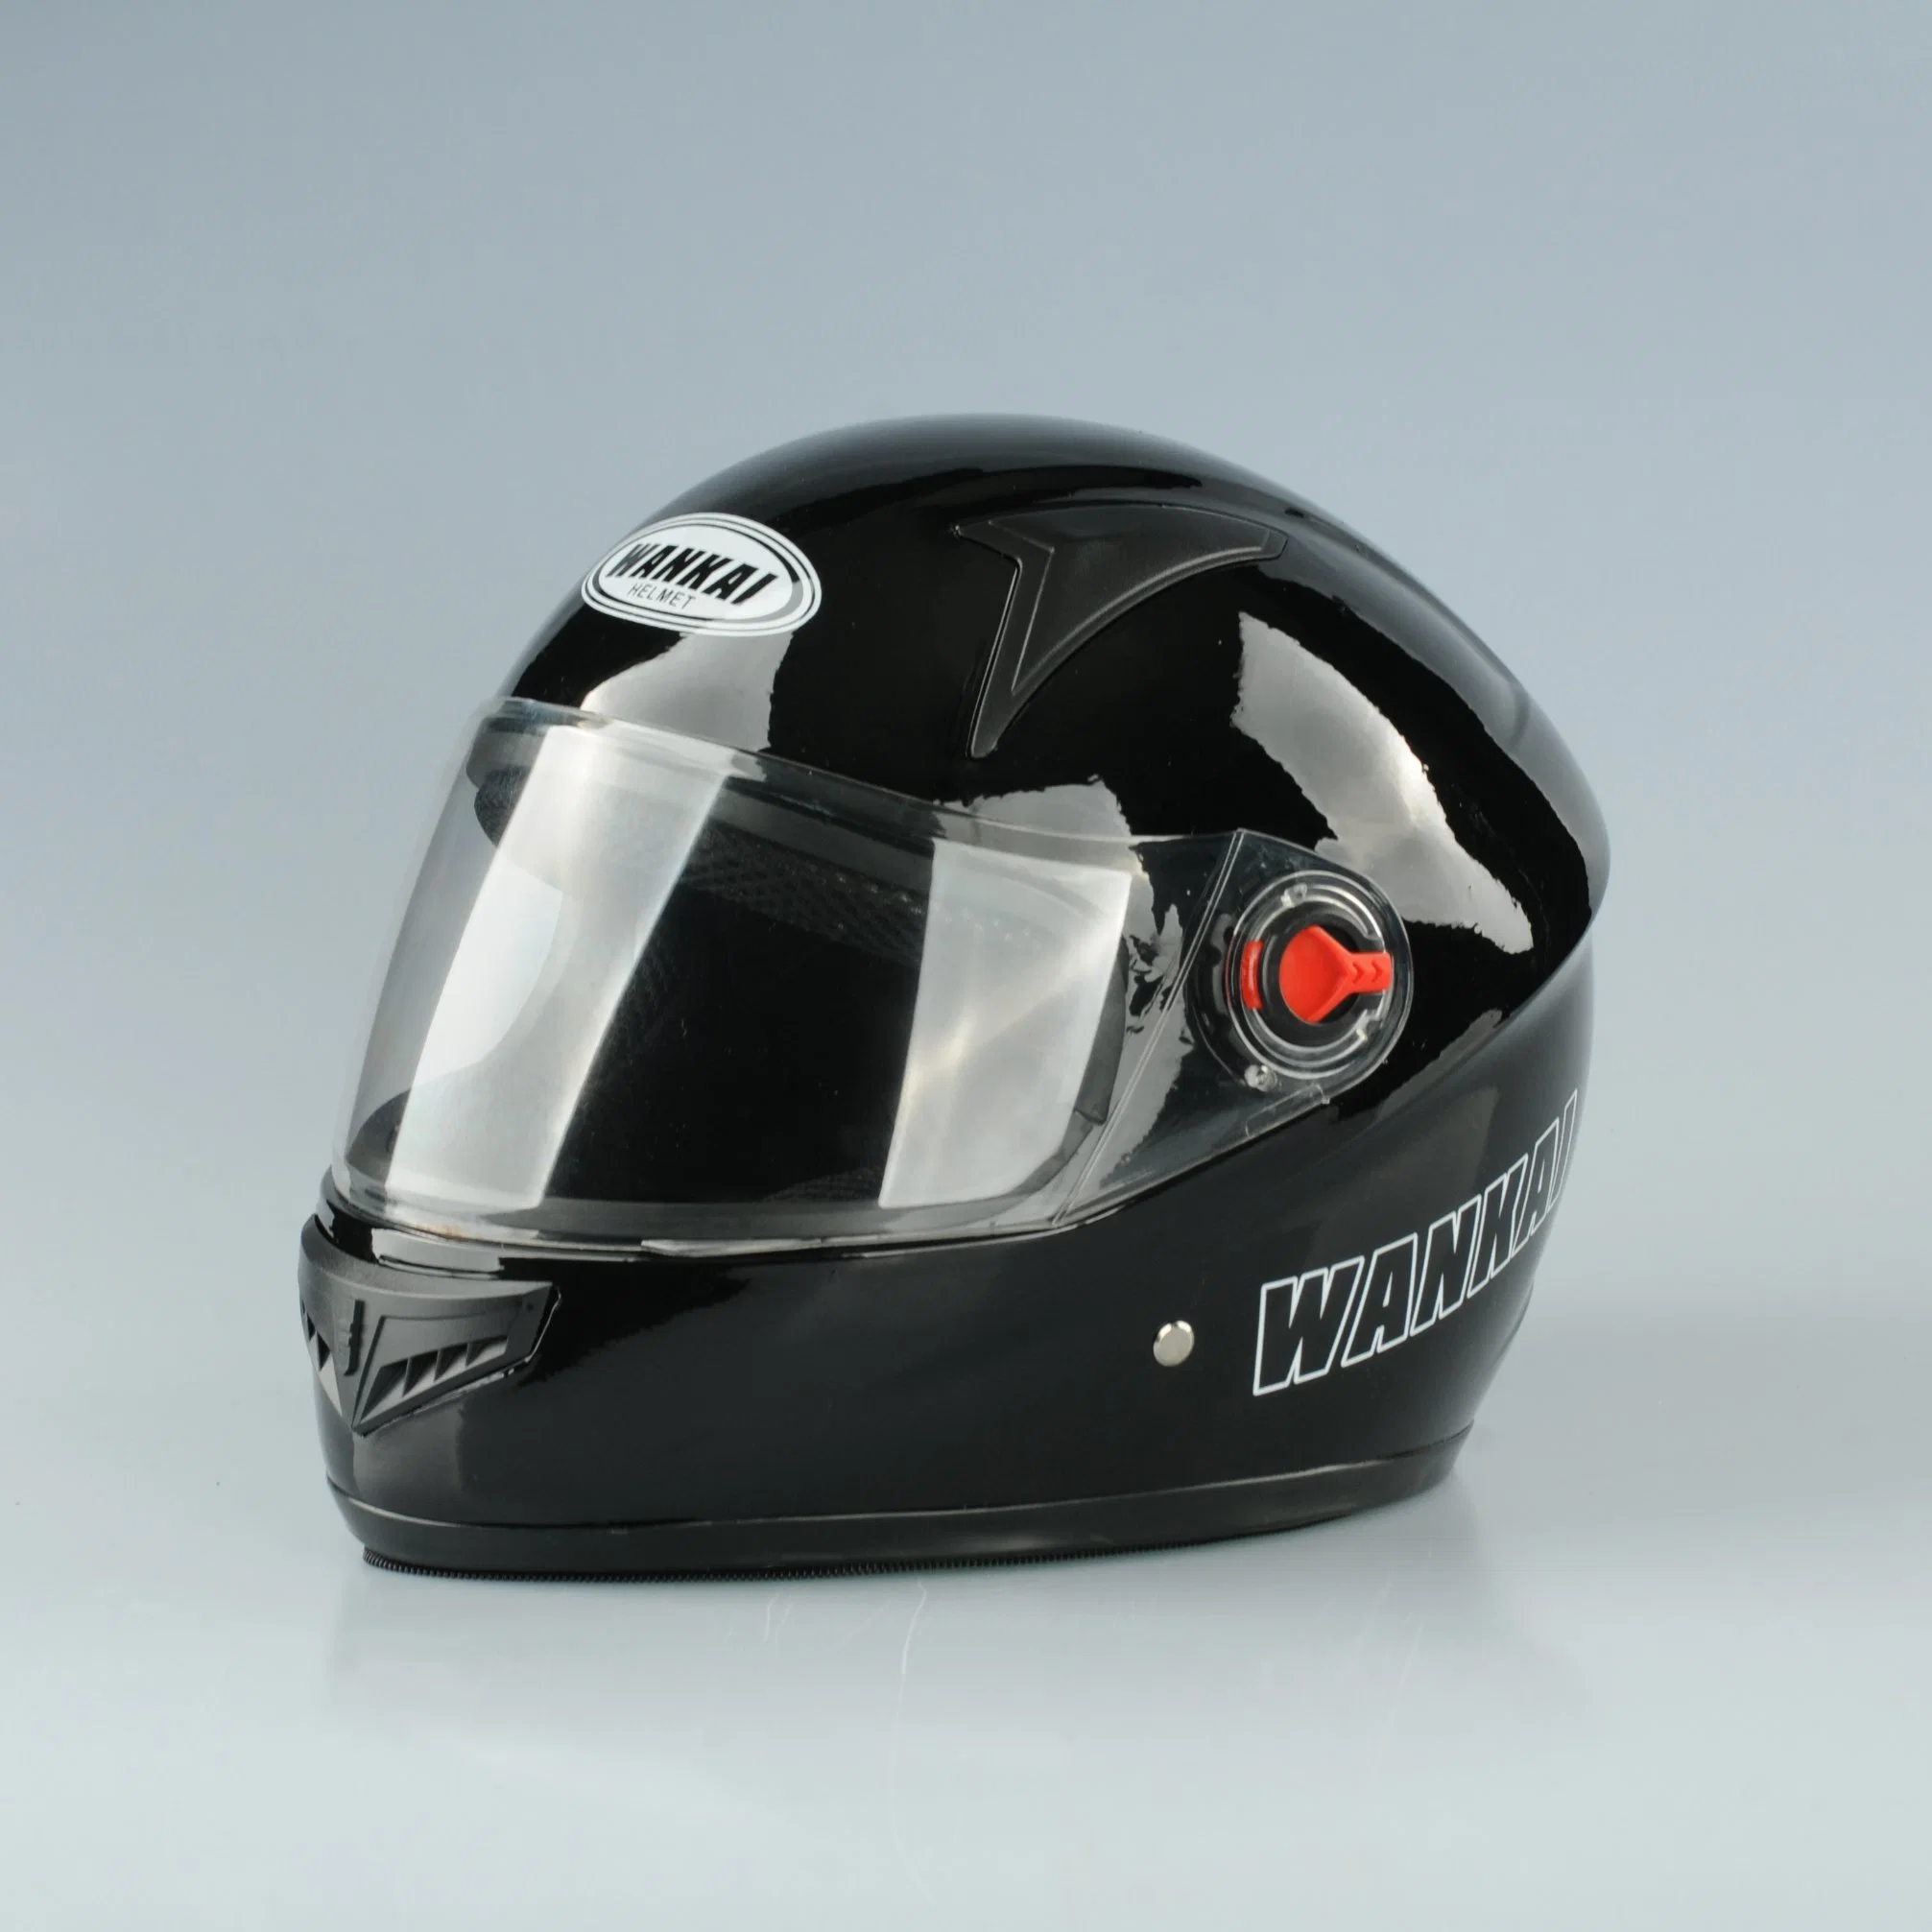 Fresh PP Helmet for Motorcycles, Electric Bikes, Scooters